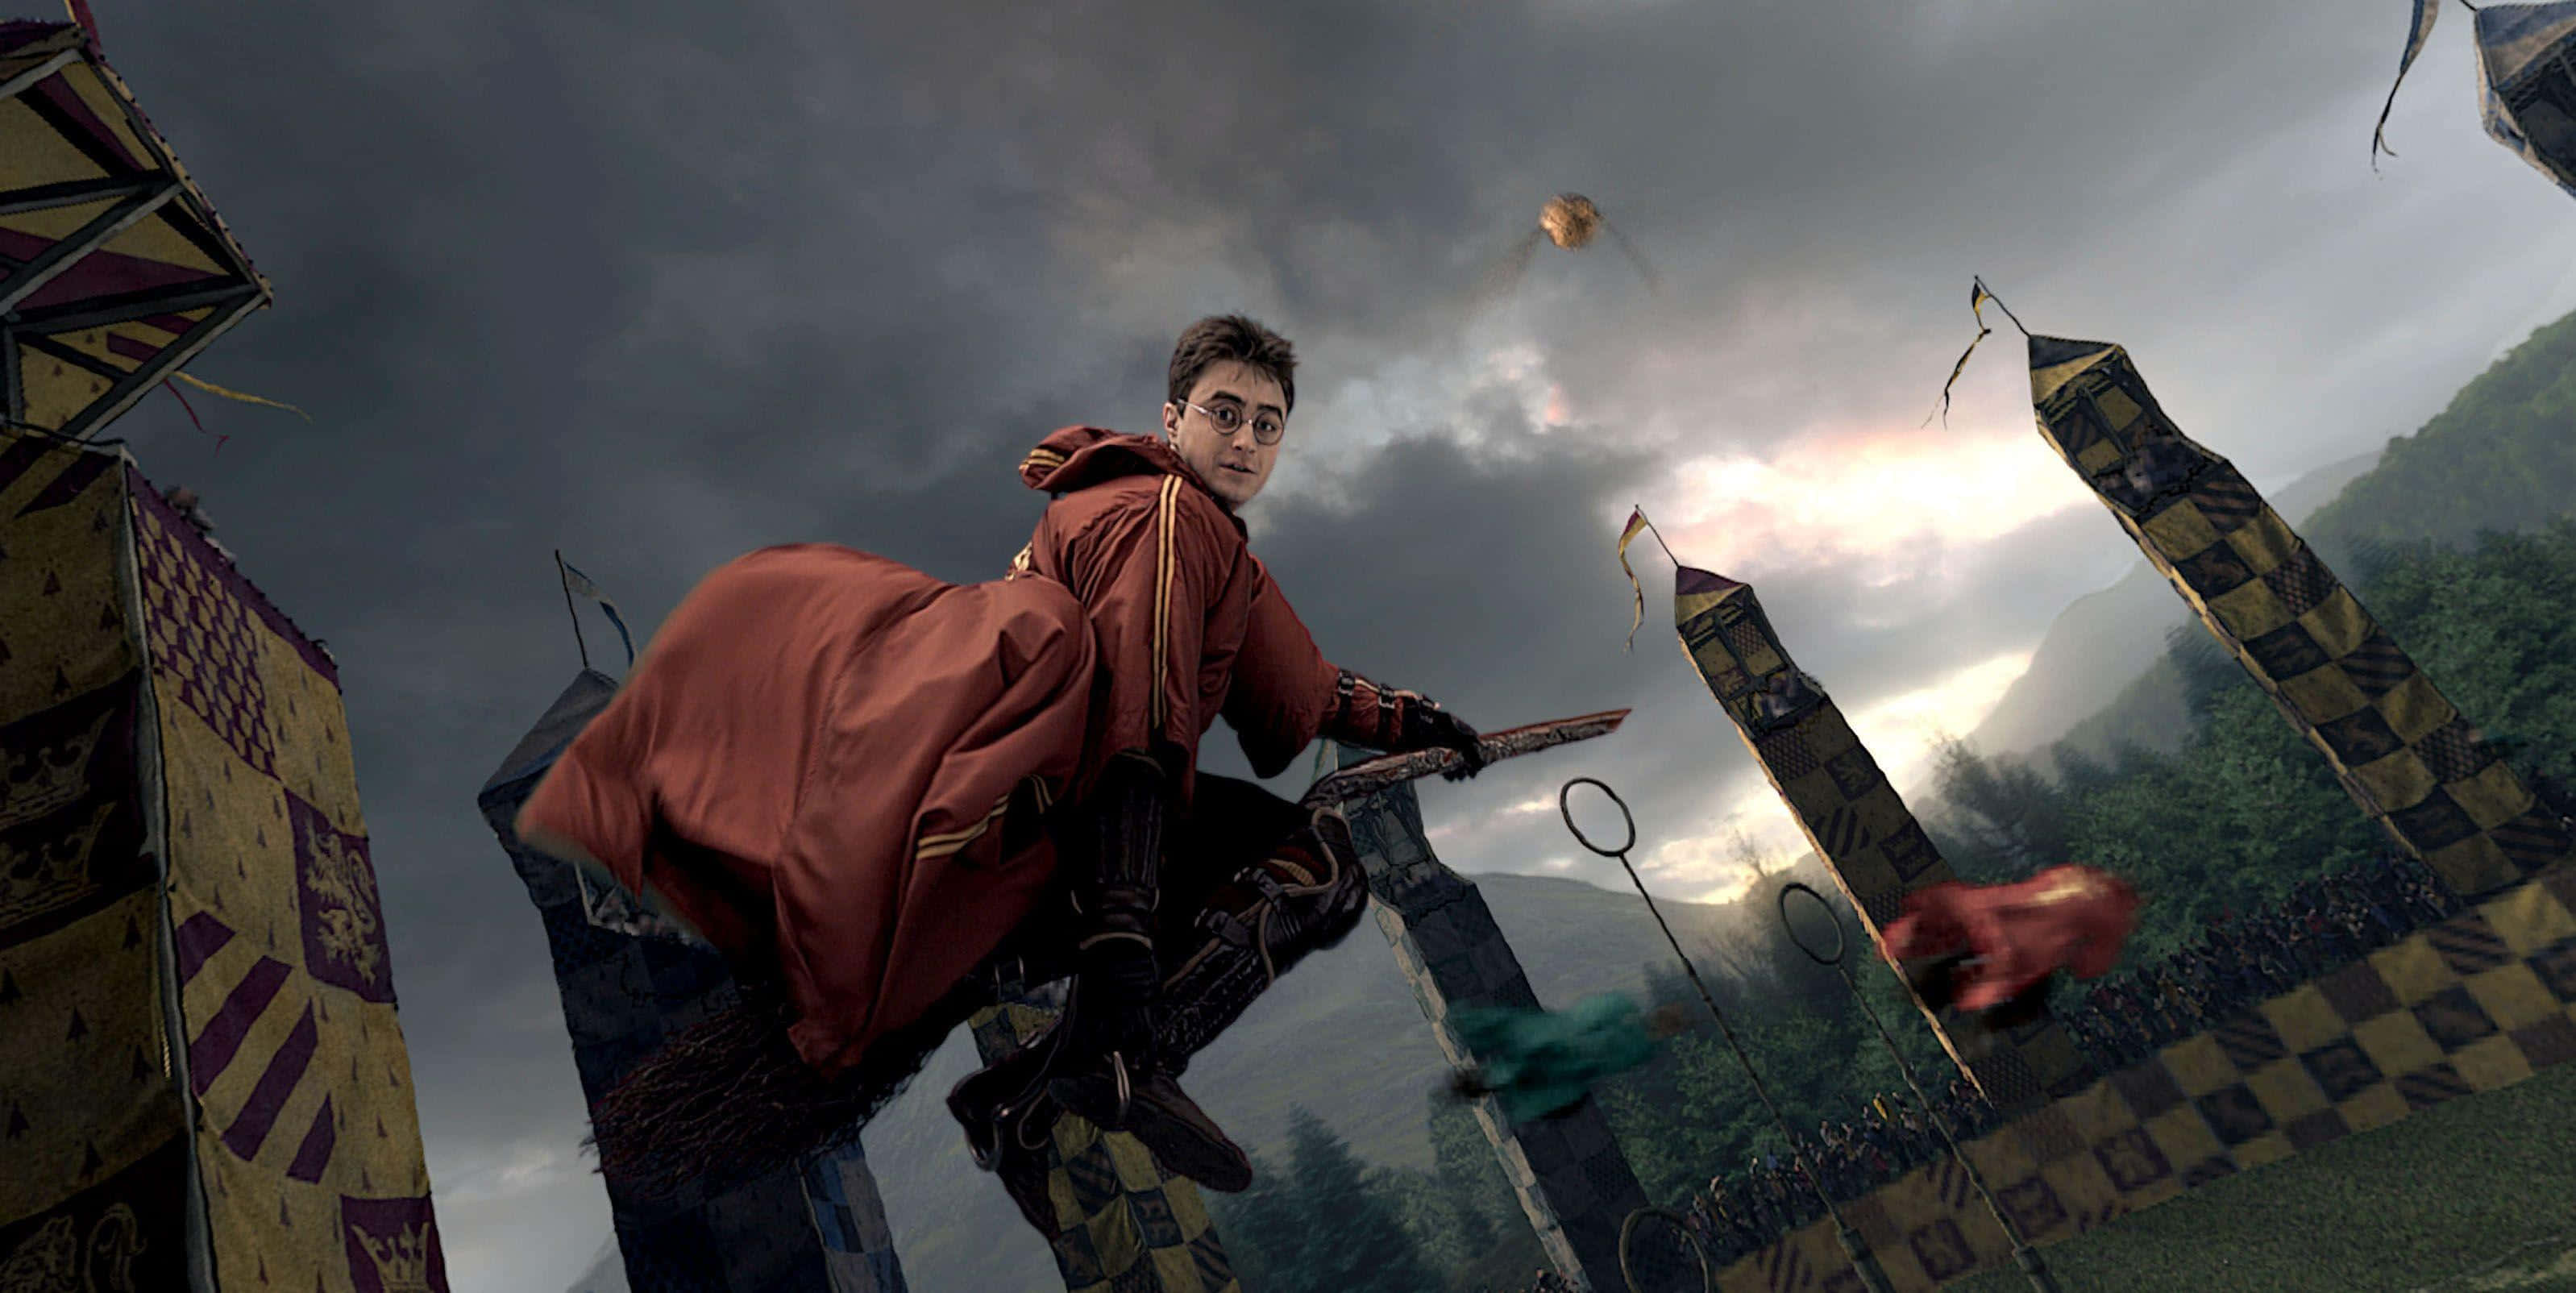 The Hogwarts Quidditch Team soars through the skies. Wallpaper